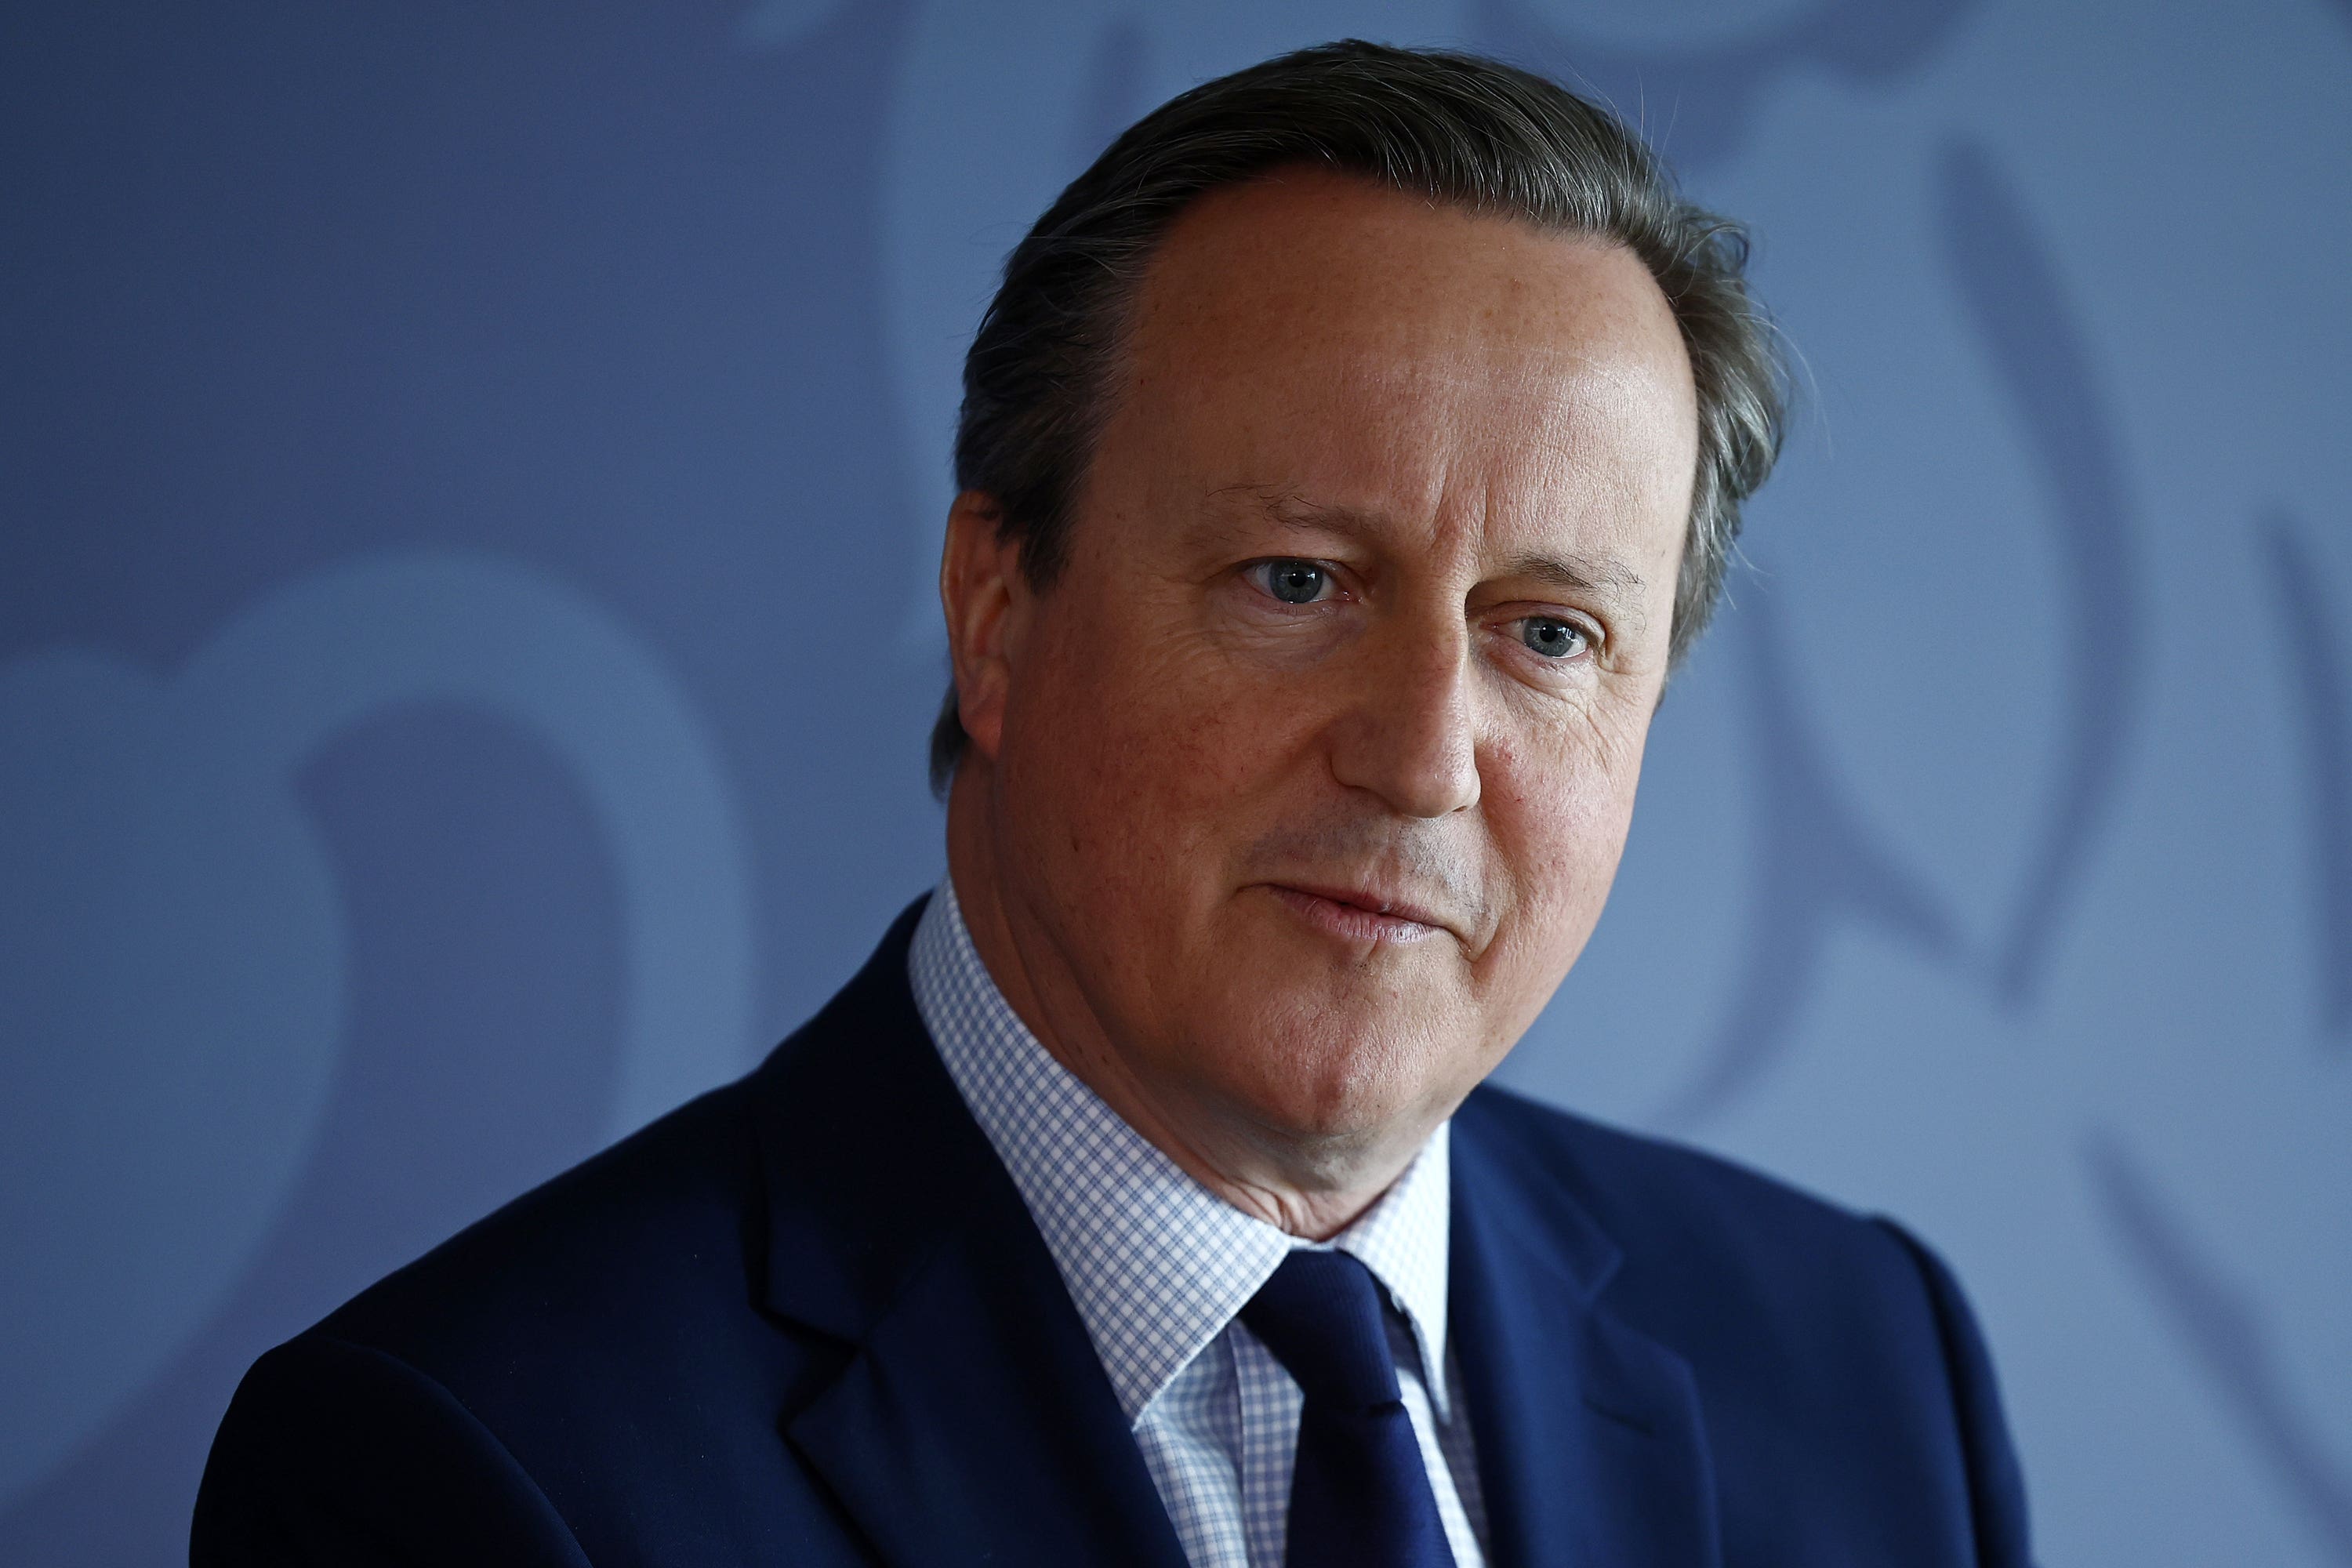 David Cameron accused the Dover MP and the Labour Party of ‘naked opportunism’